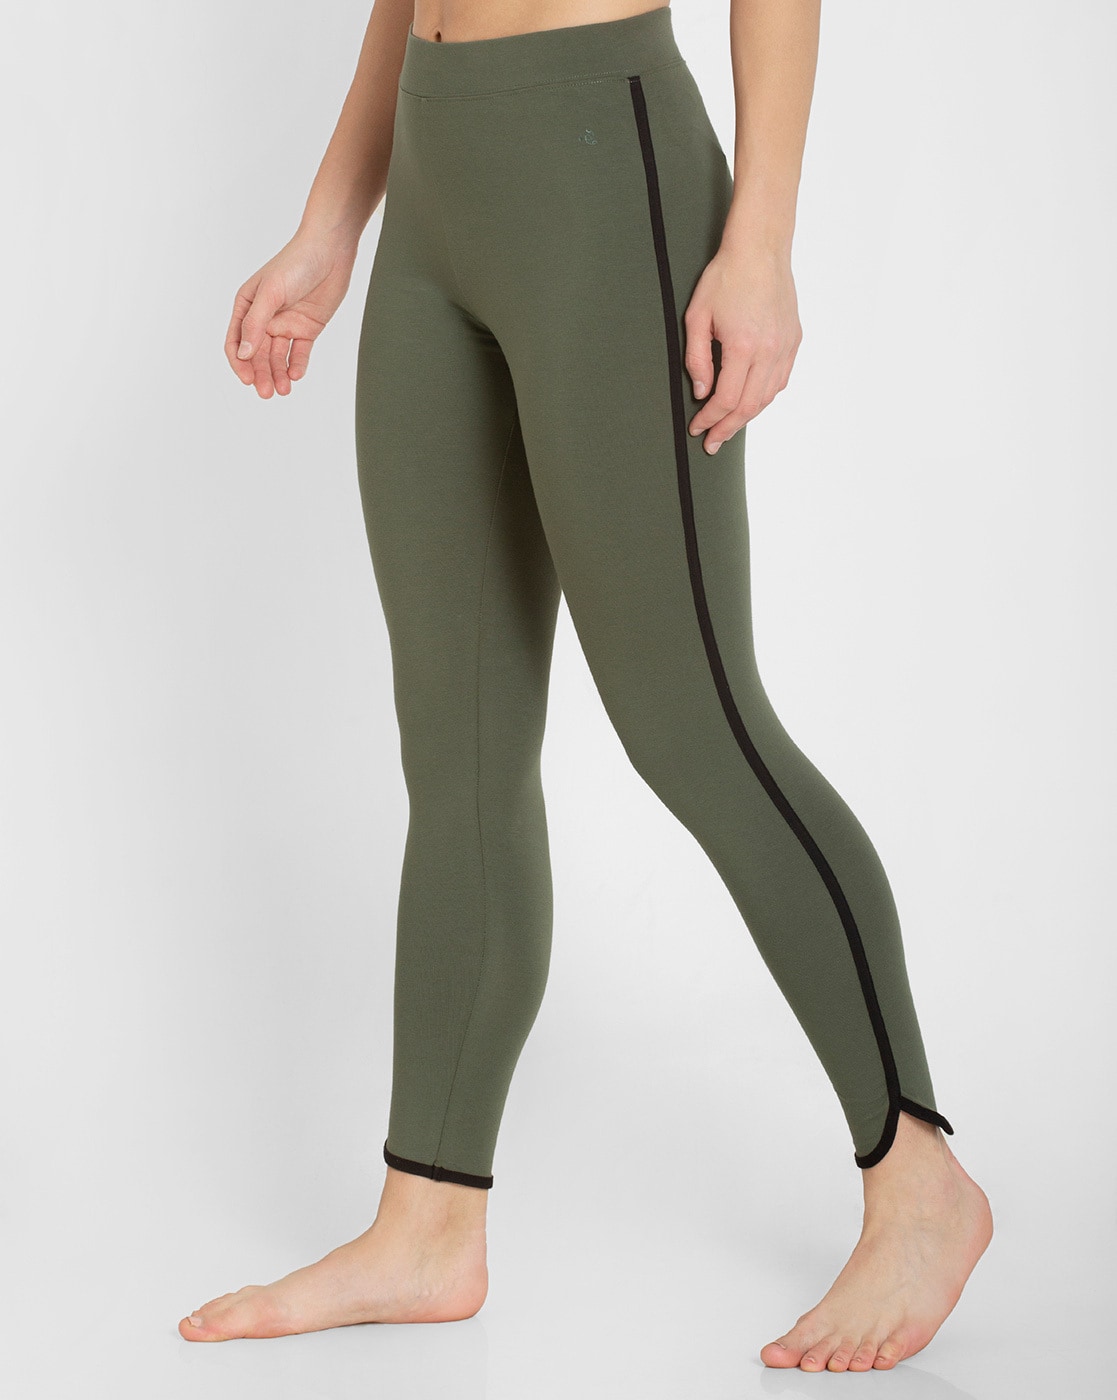 Buy Jockey AW73 Leggings Beetle XL Online at Low Prices in India at